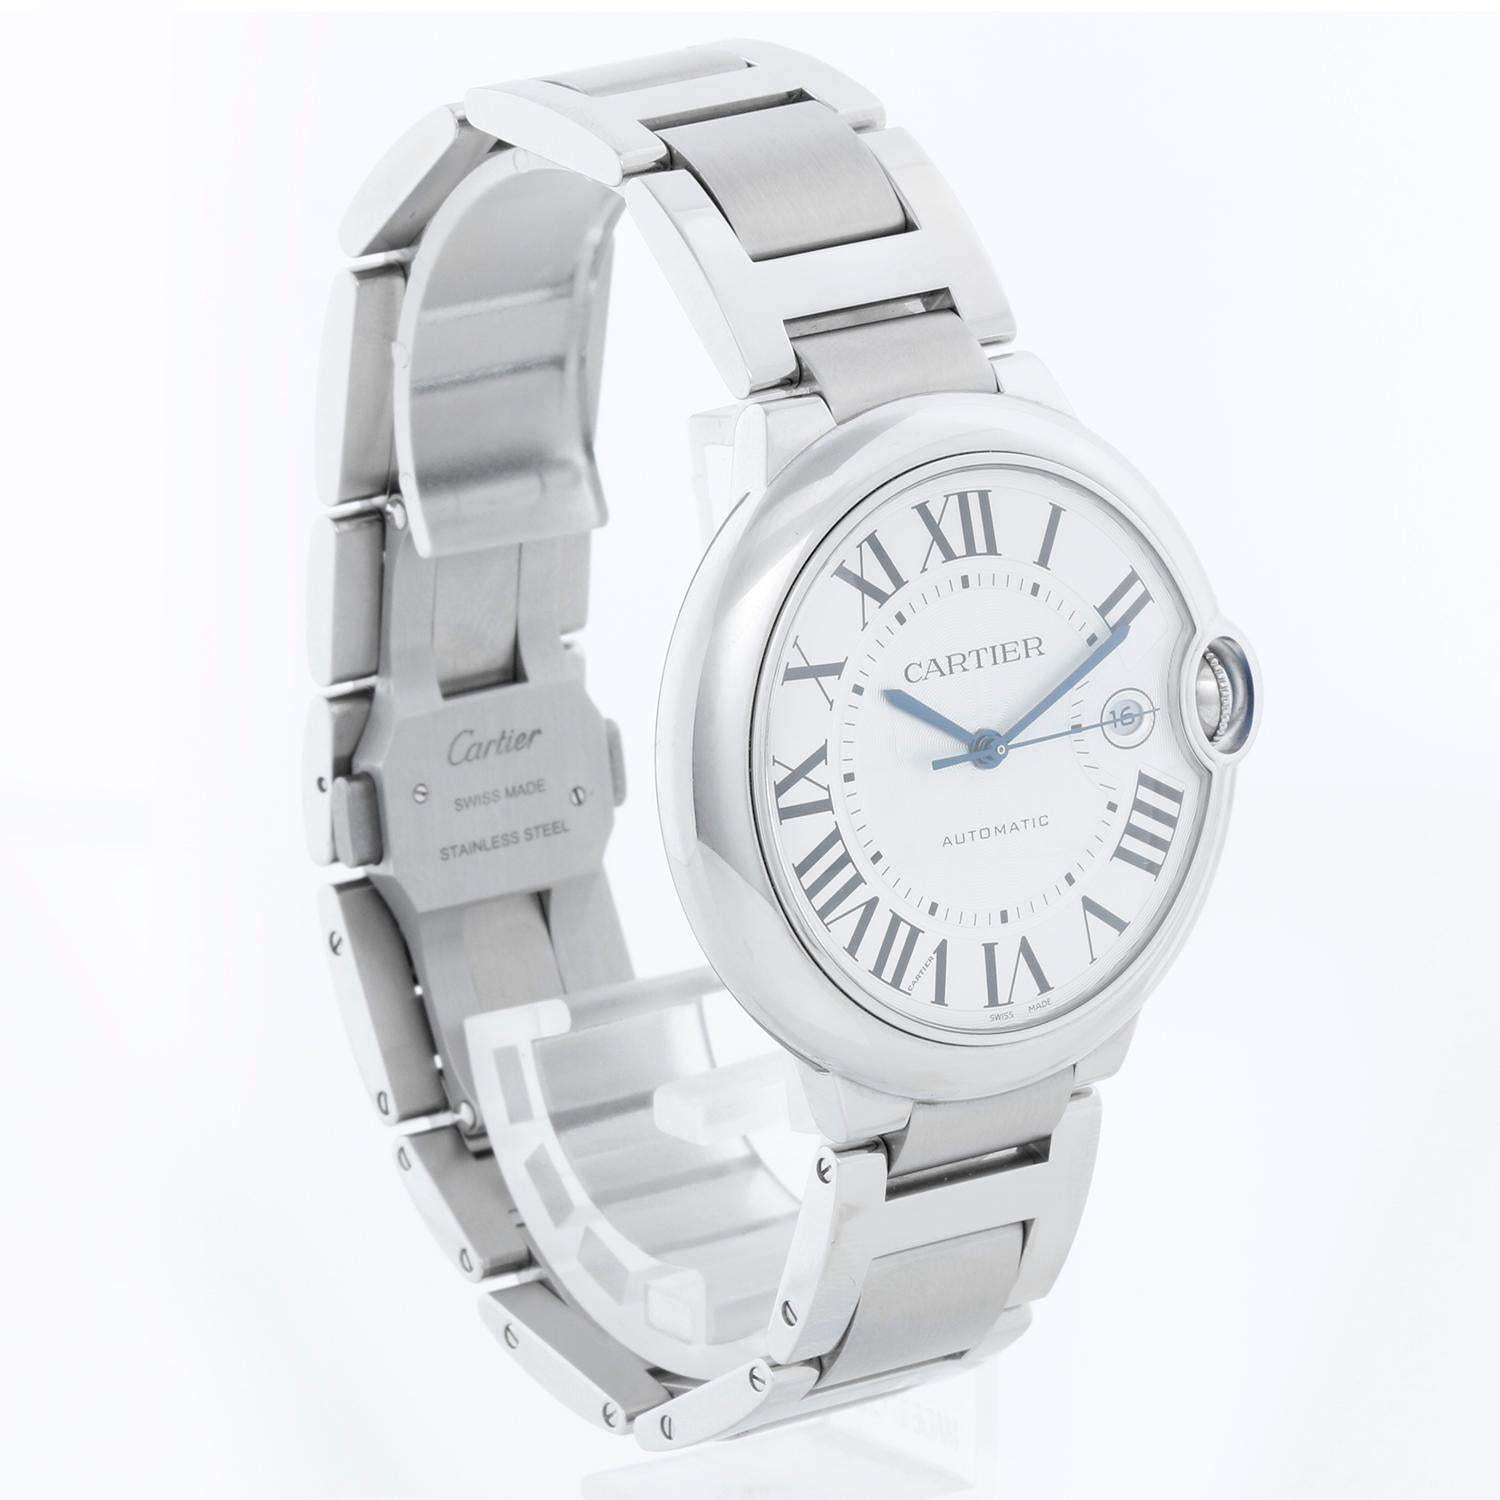 Cartier Ballon Bleu Men's 42mm Stainless Steel Automatic W69012Z4 3765 - Automatic winding. Stainless Steel (42mm diameter). Silver guilloche dial with Roman numerals; date at 3 o'clock. Stainless steel bracelet. Pre-owned with custom box.